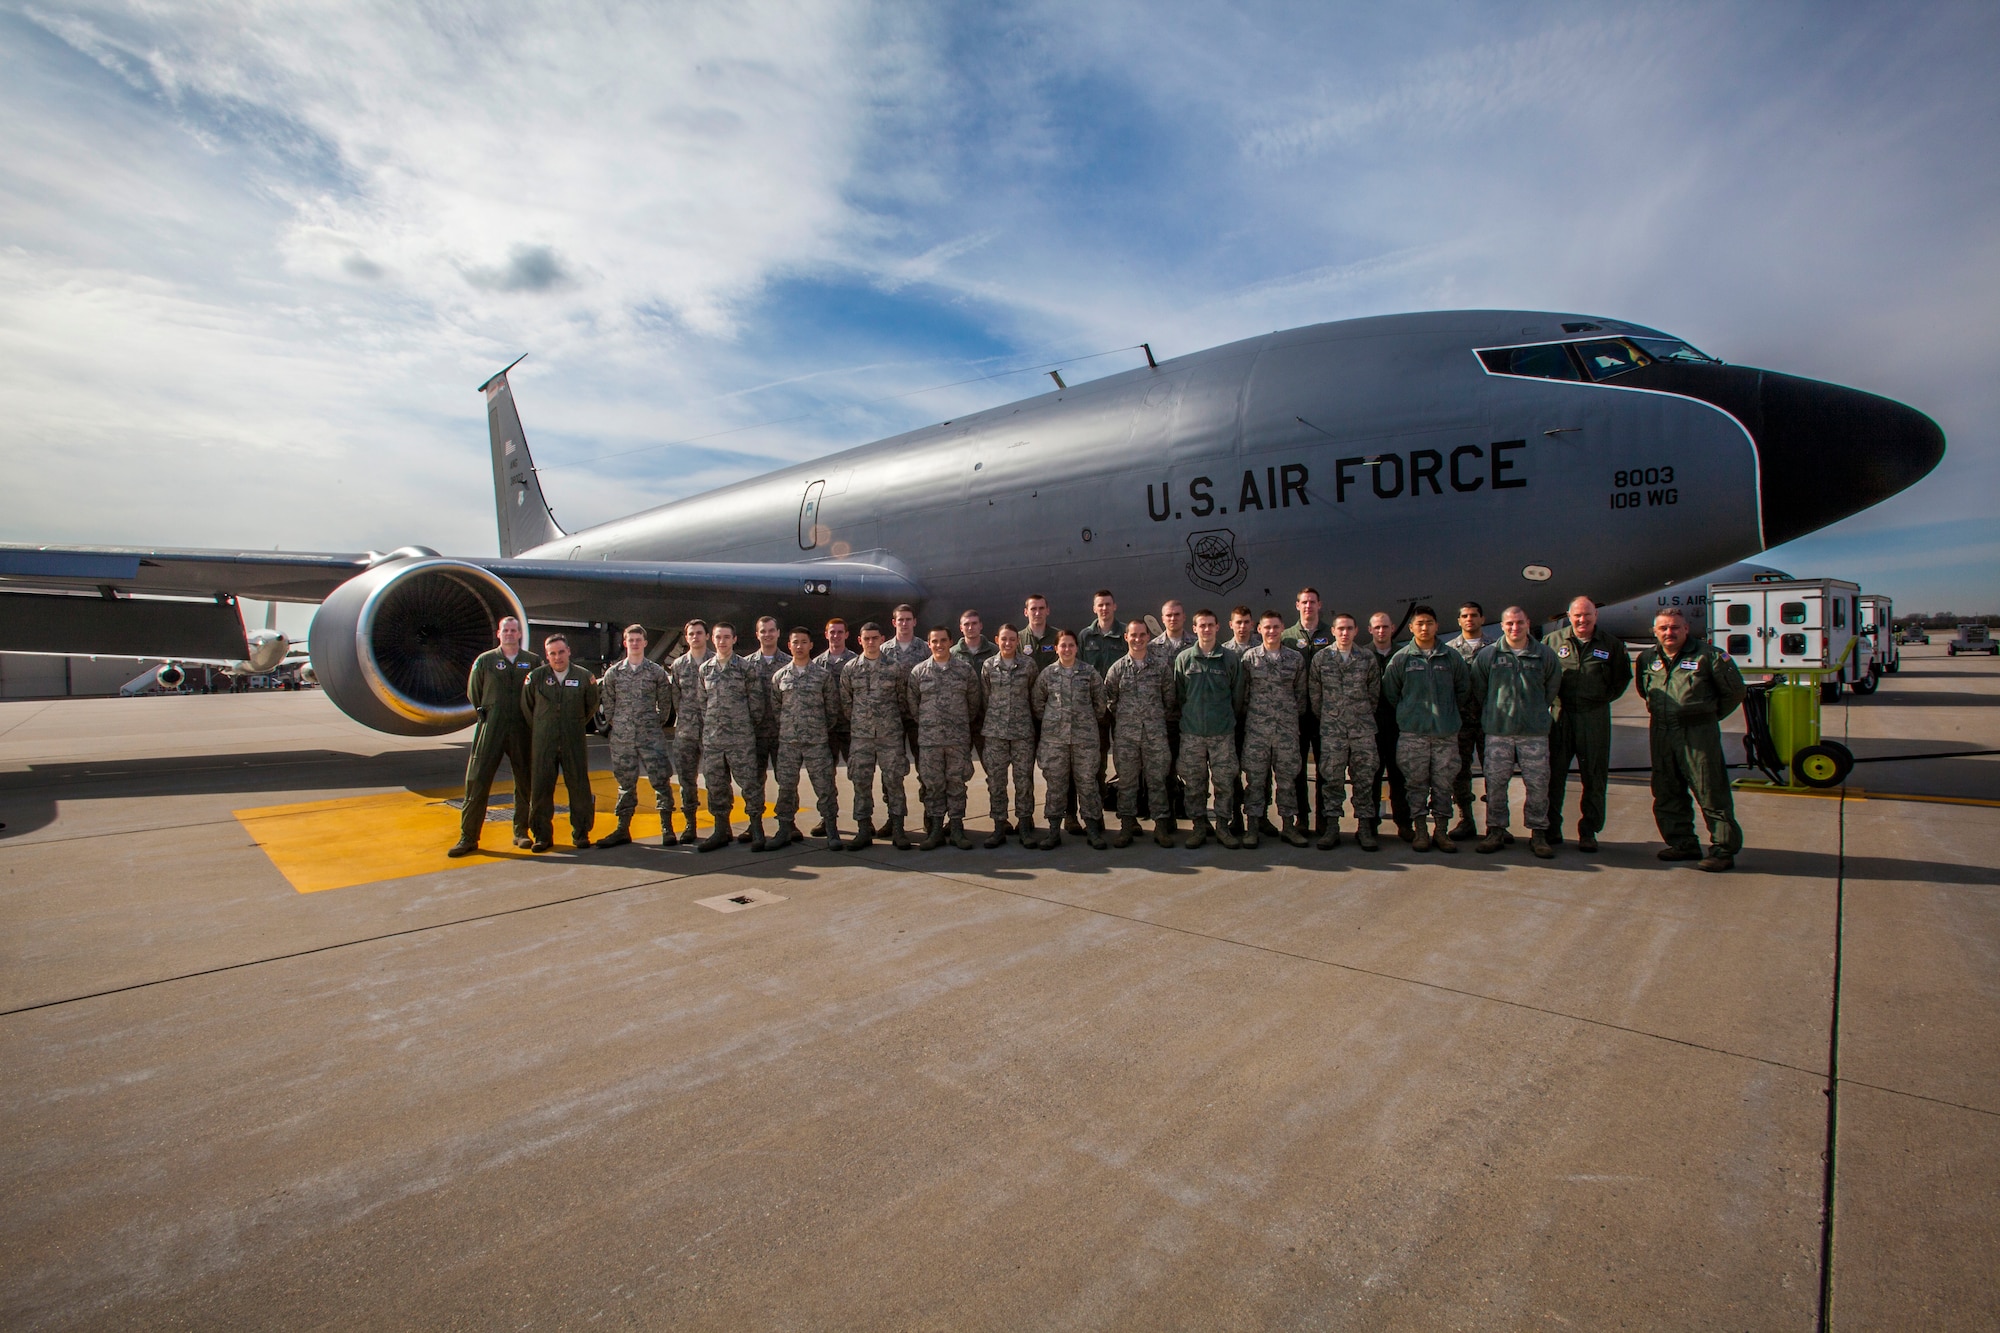 Cadets from Detachment 750, Air Force ROTC, St. Joseph's University, and pilots and boom operators with the 108th Wing, New Jersey Air National Guard, pose for a group photo in front of a KC-135 Stratotanker at Joint Base McGuire Dix-Lakehurst, N.J., after a refueling mission April 2, 2014. The orientation flight gave the 25 Air Force ROTC cadets an opportunity to observe the pilots and aircrew perform their jobs in a real world environment. (U.S. Air National Guard photo by Master Sgt. Mark C. Olsen/Released)